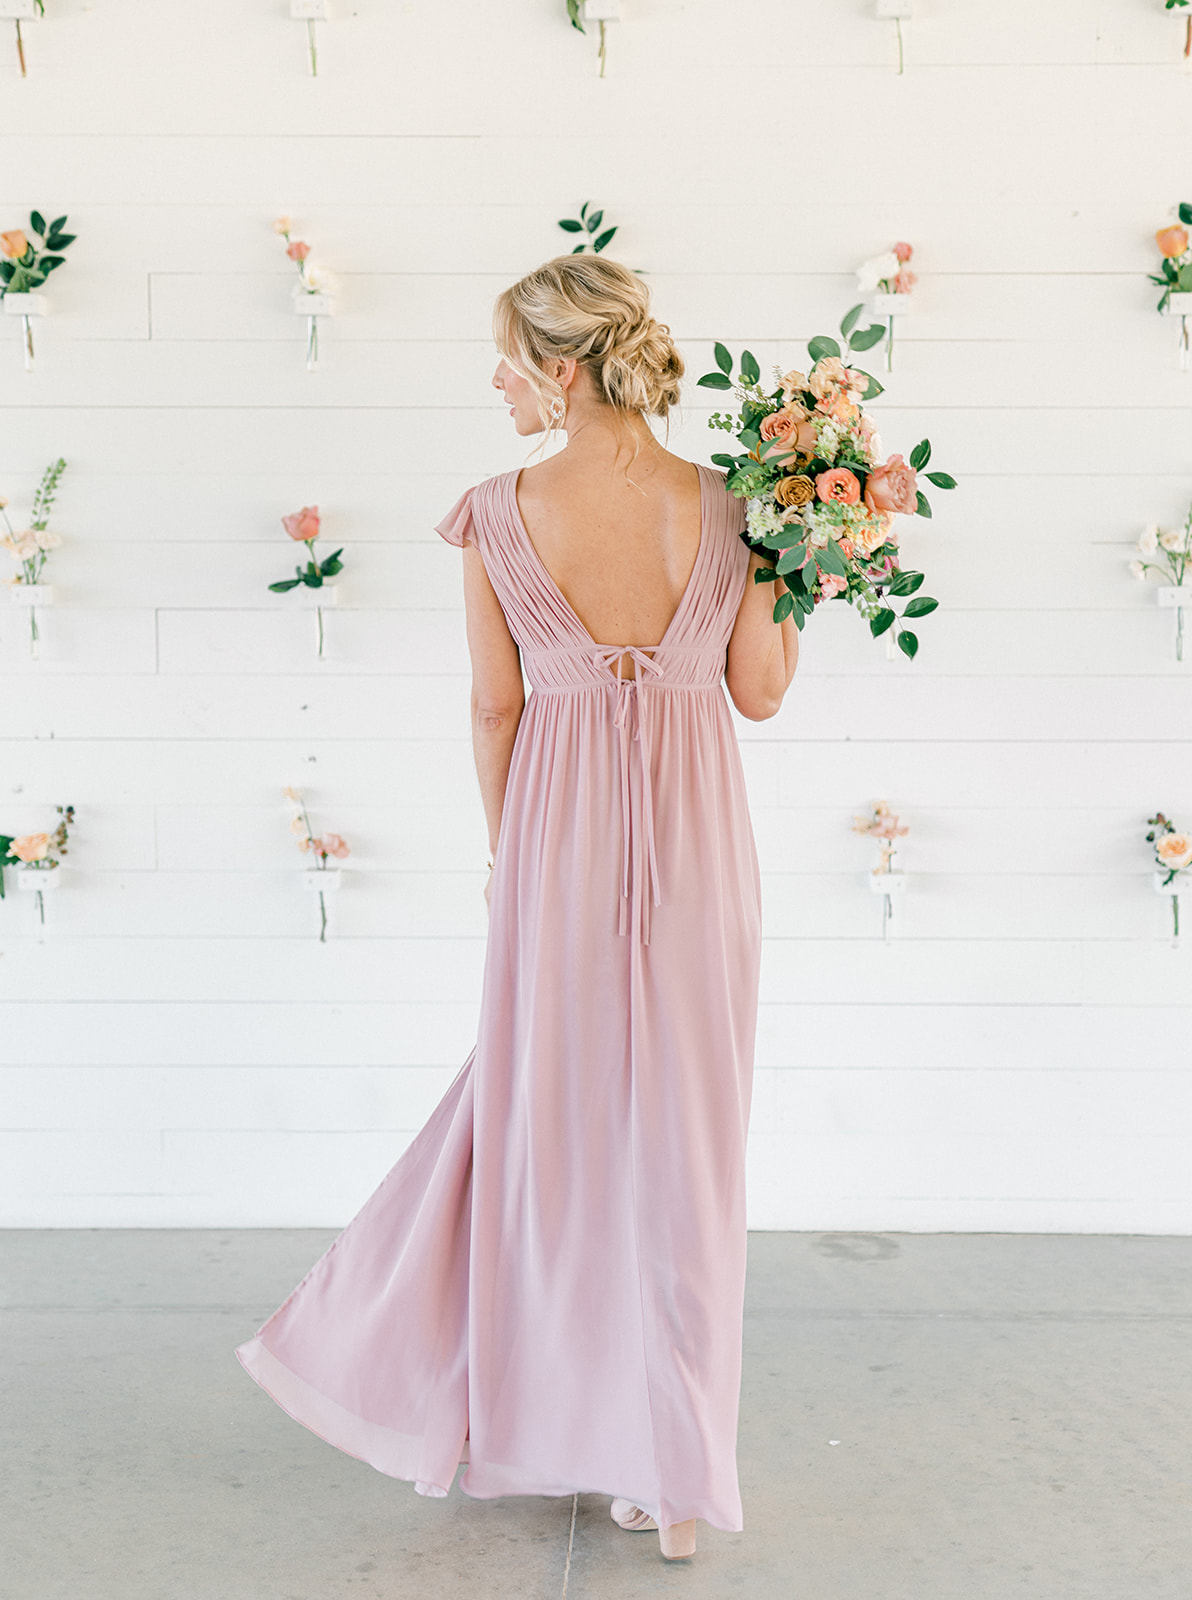 Meet our new 2021 Chiffon Styles - Revelry